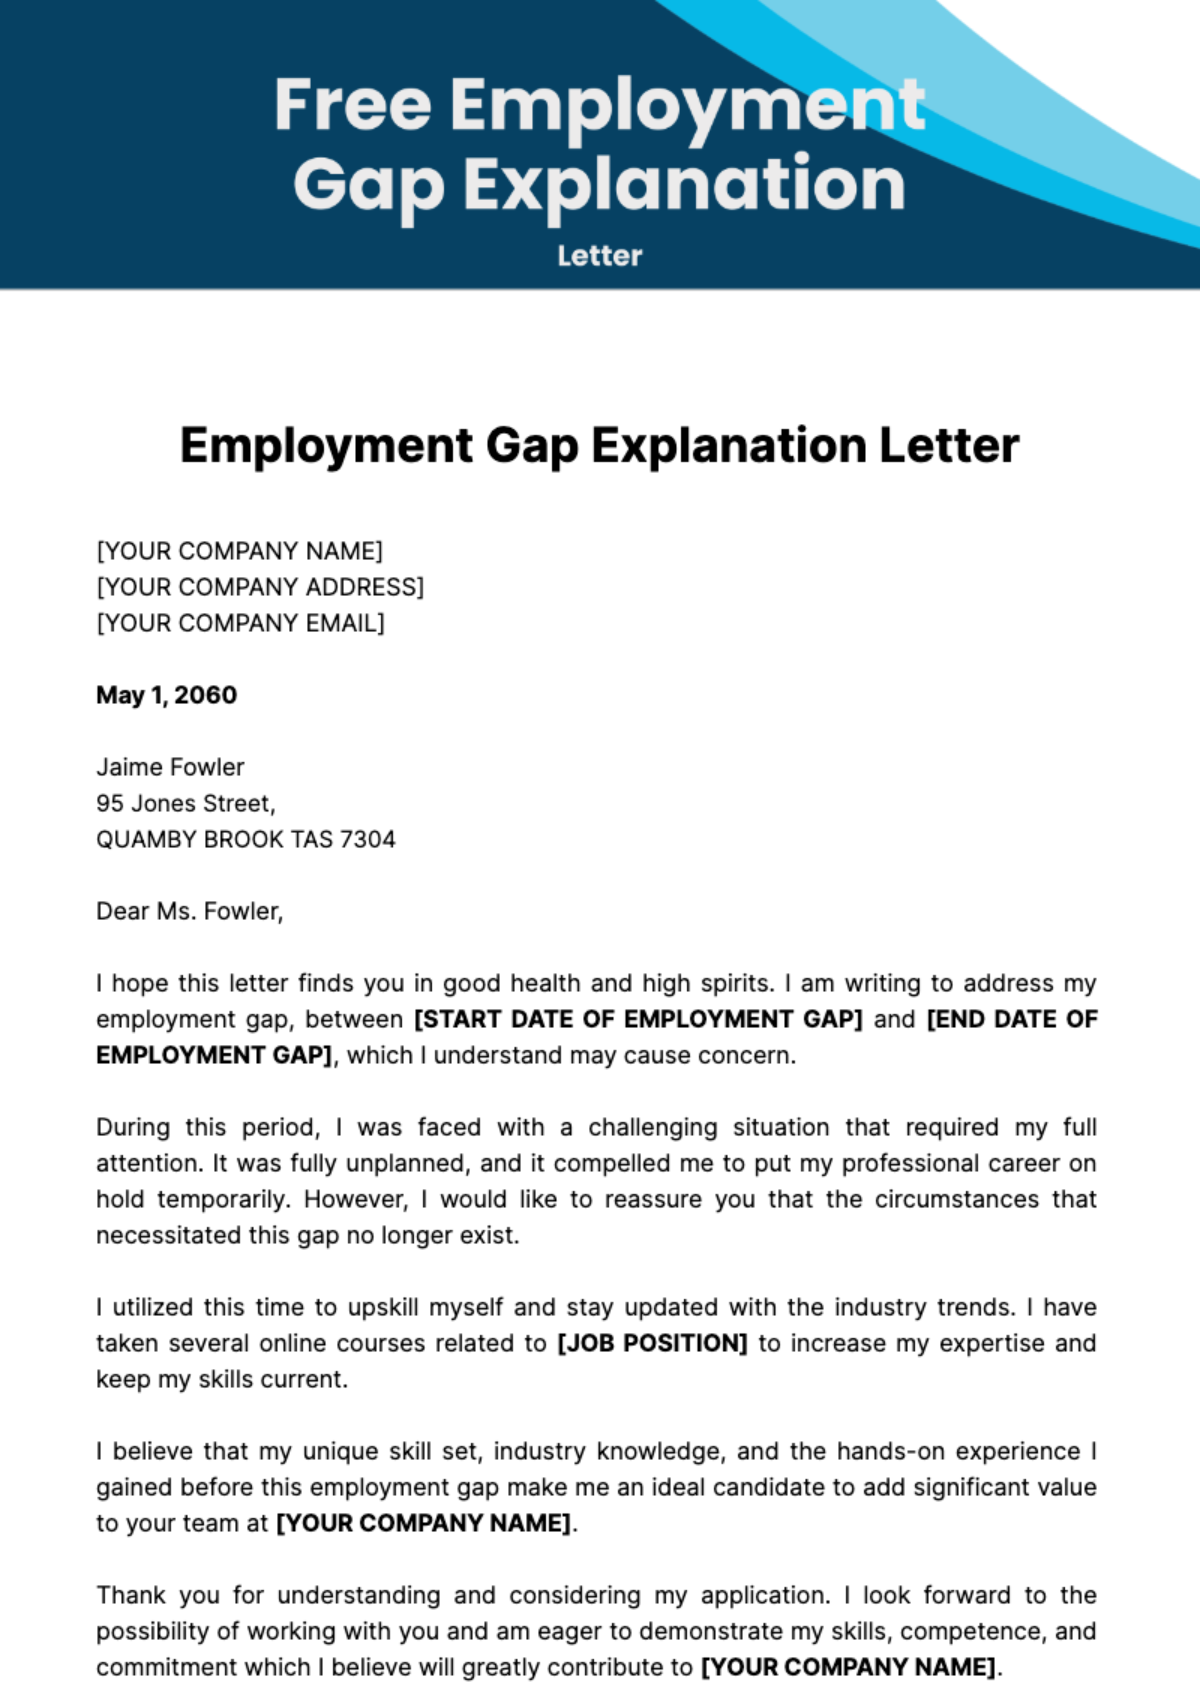 Free Employment Gap Explanation Letter Template